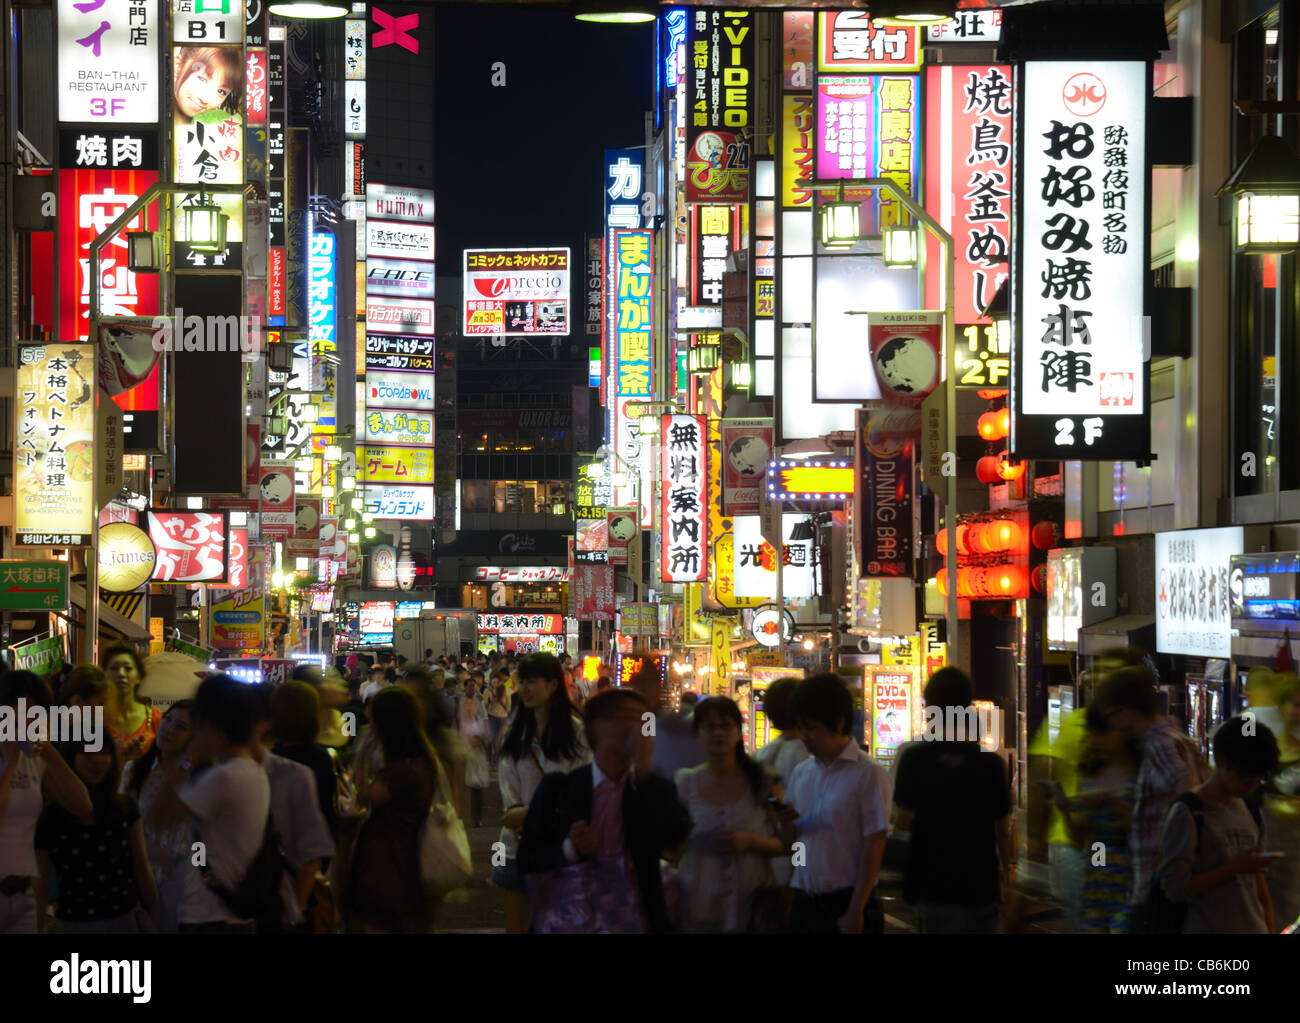 Kabuki-cho is the redlight and entertainment district of Tokyo, Japan. Stock Photo